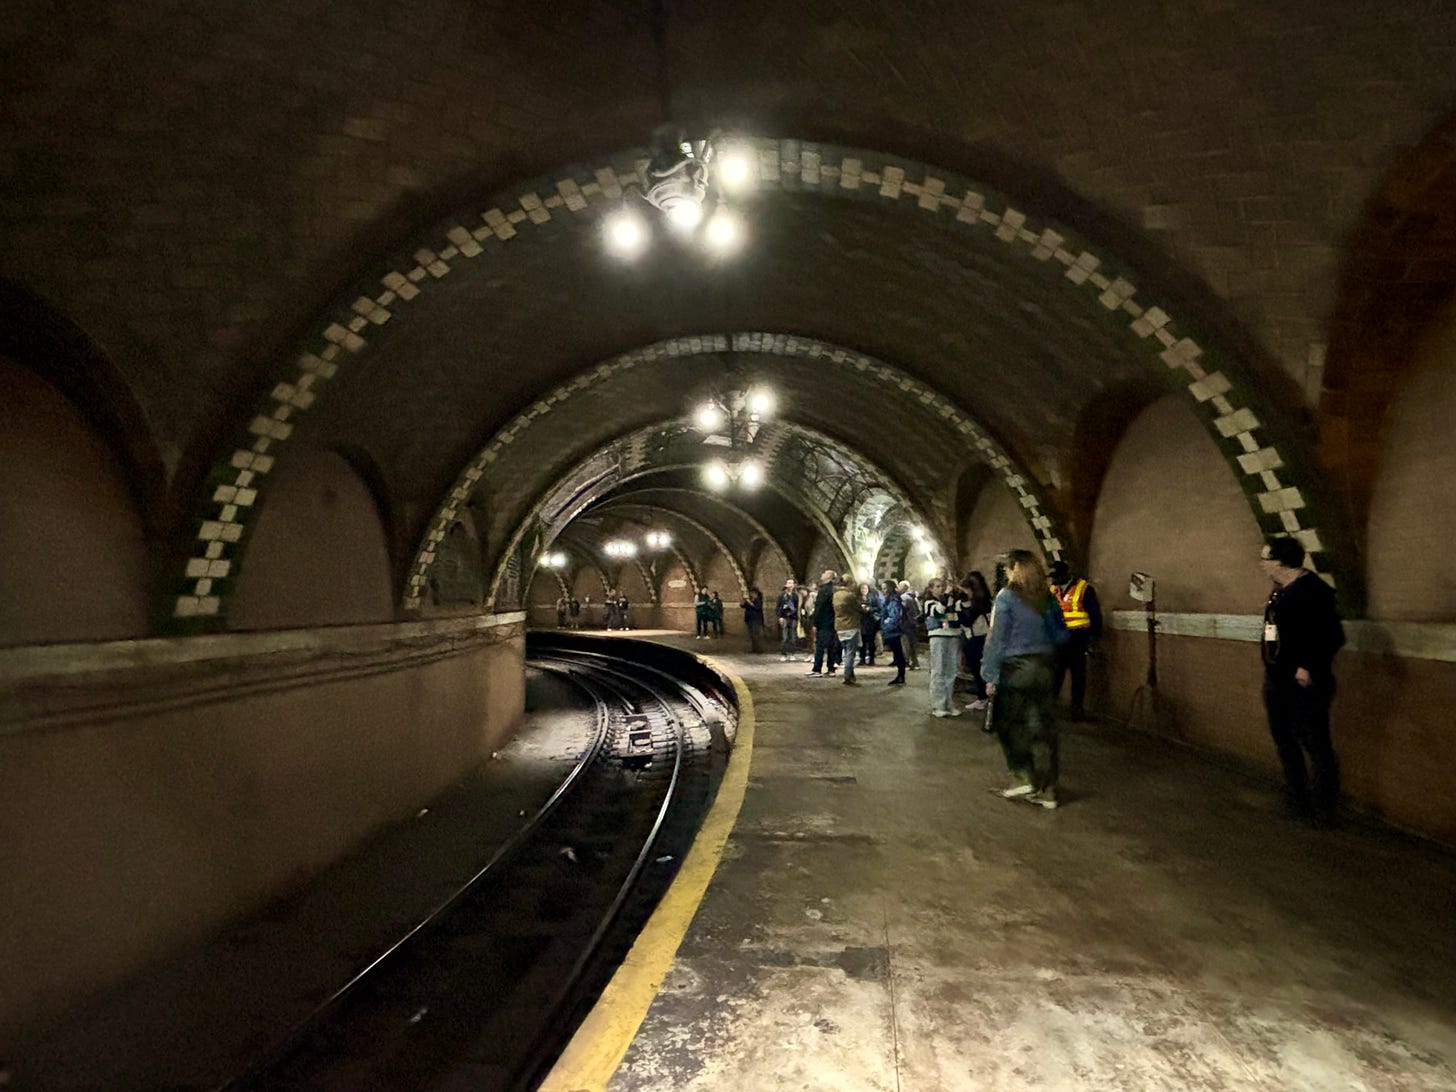 Looking down the platform of City Hall Station. There is an intricate pattern in the terra cotta tiles between the green and white tiled arches. The chandeliers are bright. There are people milling around taking pictures excitedly.